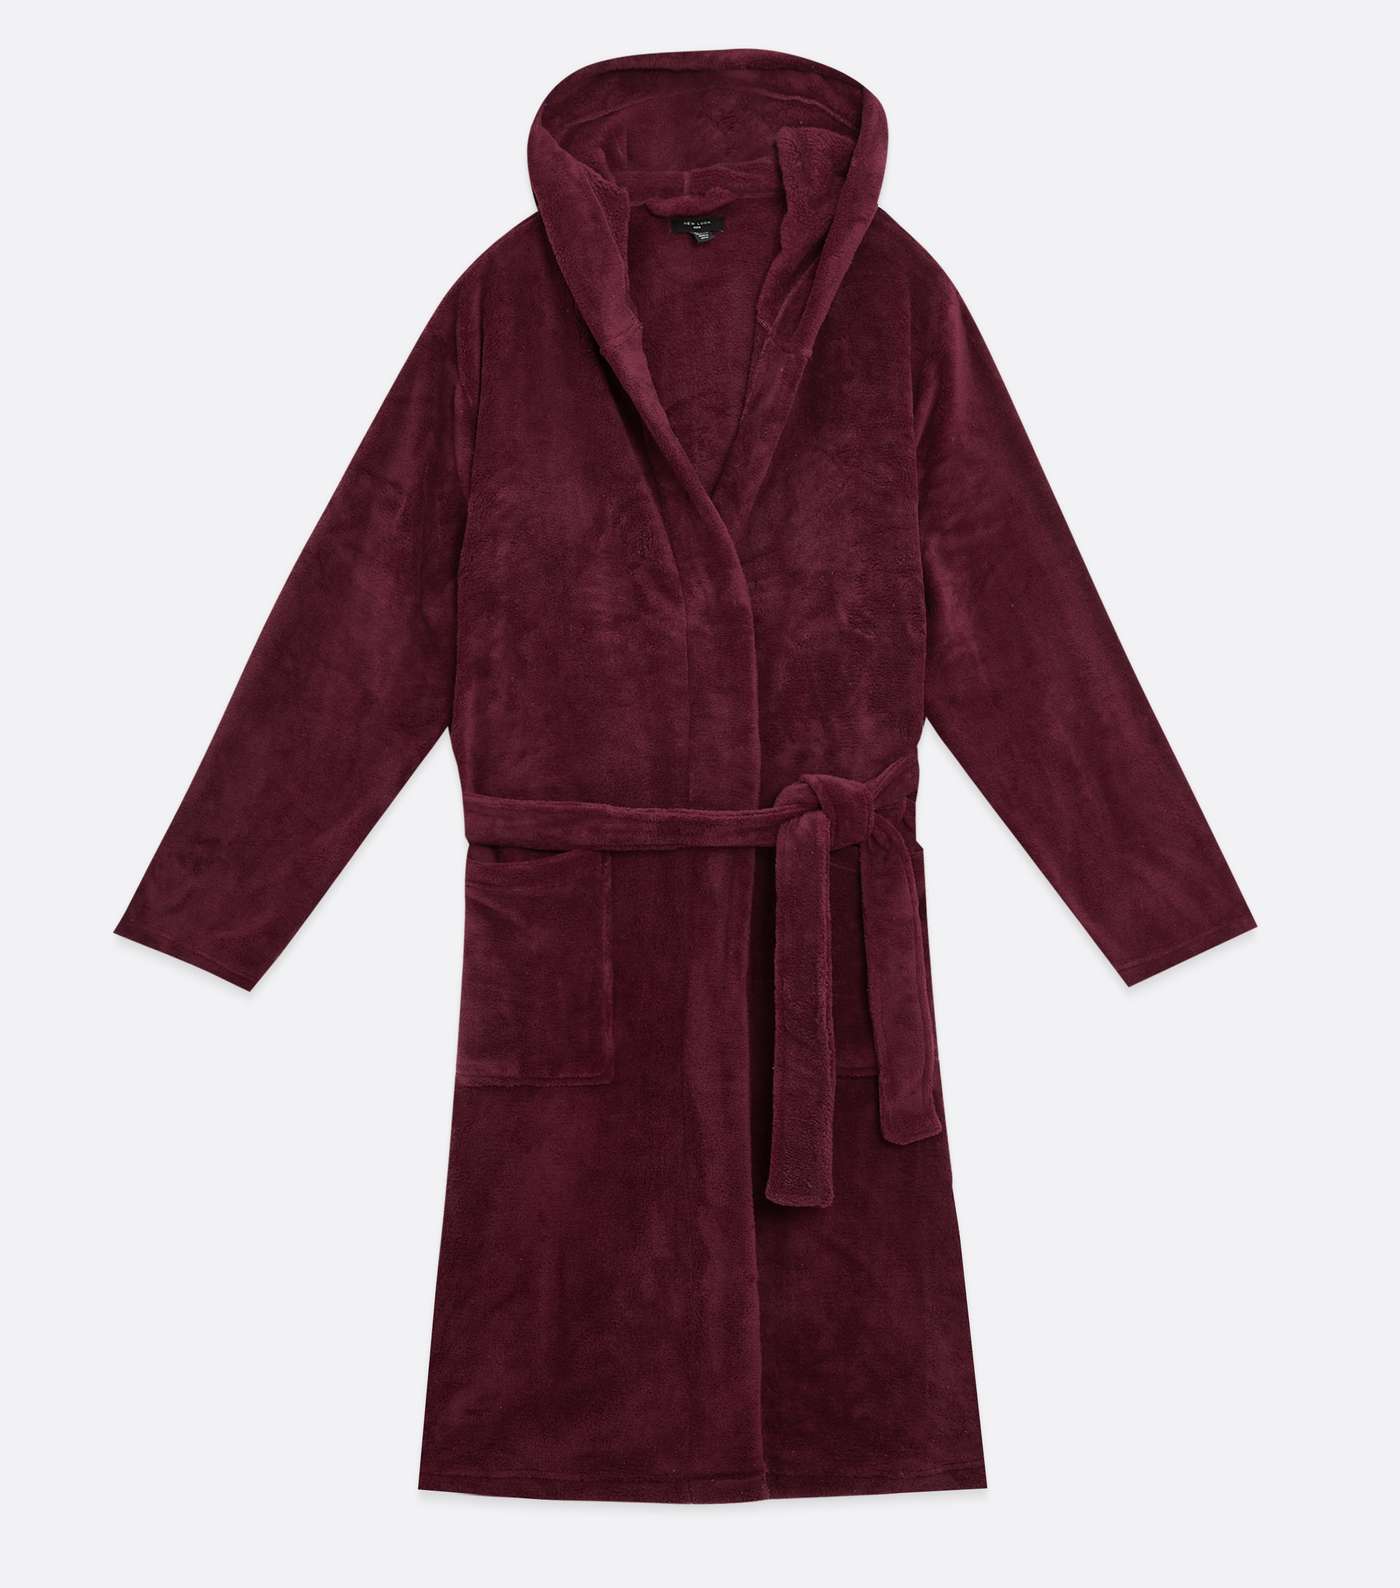 Burgundy Faux Fur Hooded Dressing Gown Image 5